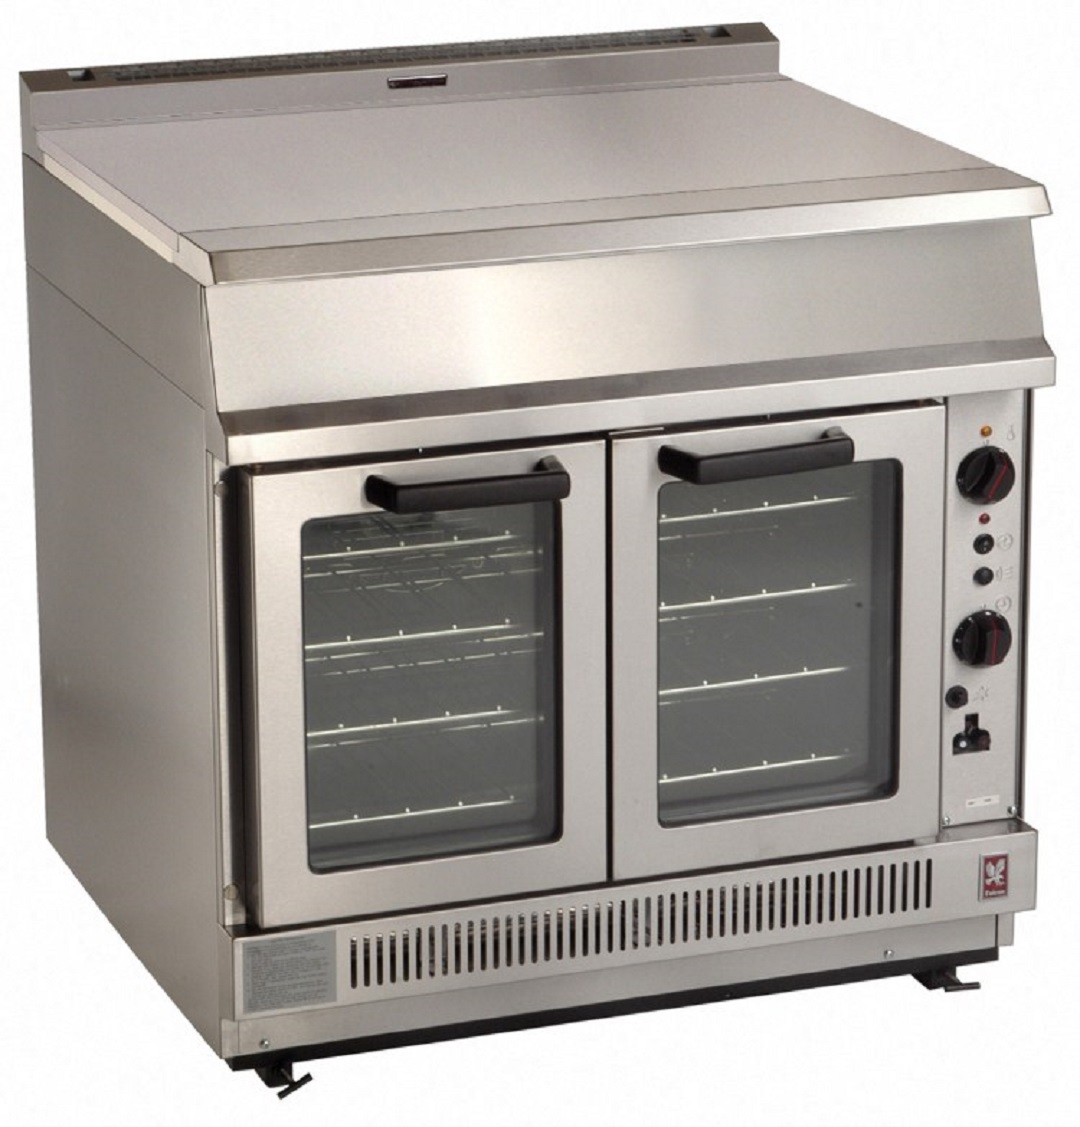 Falcon Dominator G2112 Convection Oven With Worktop